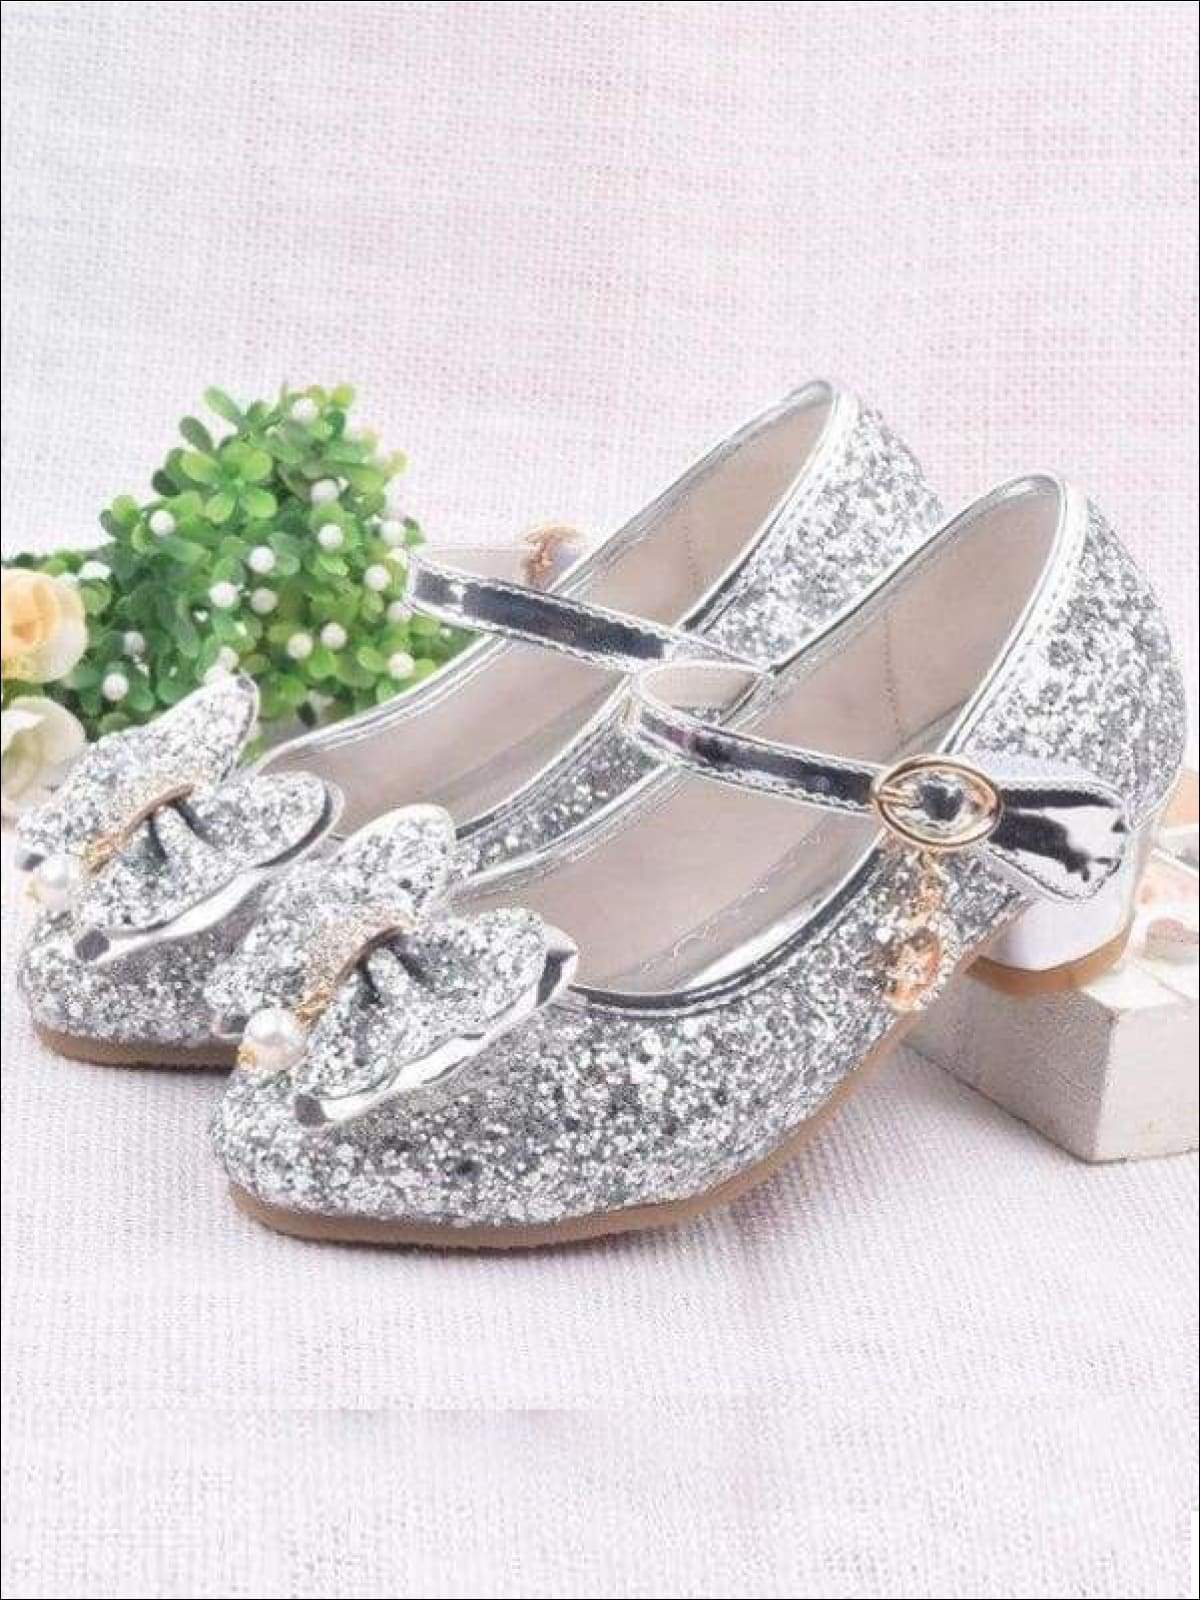 Girls Pearl Embellished Bow Tie Mary Jane Glitter Princess Shoes - Girls Flats